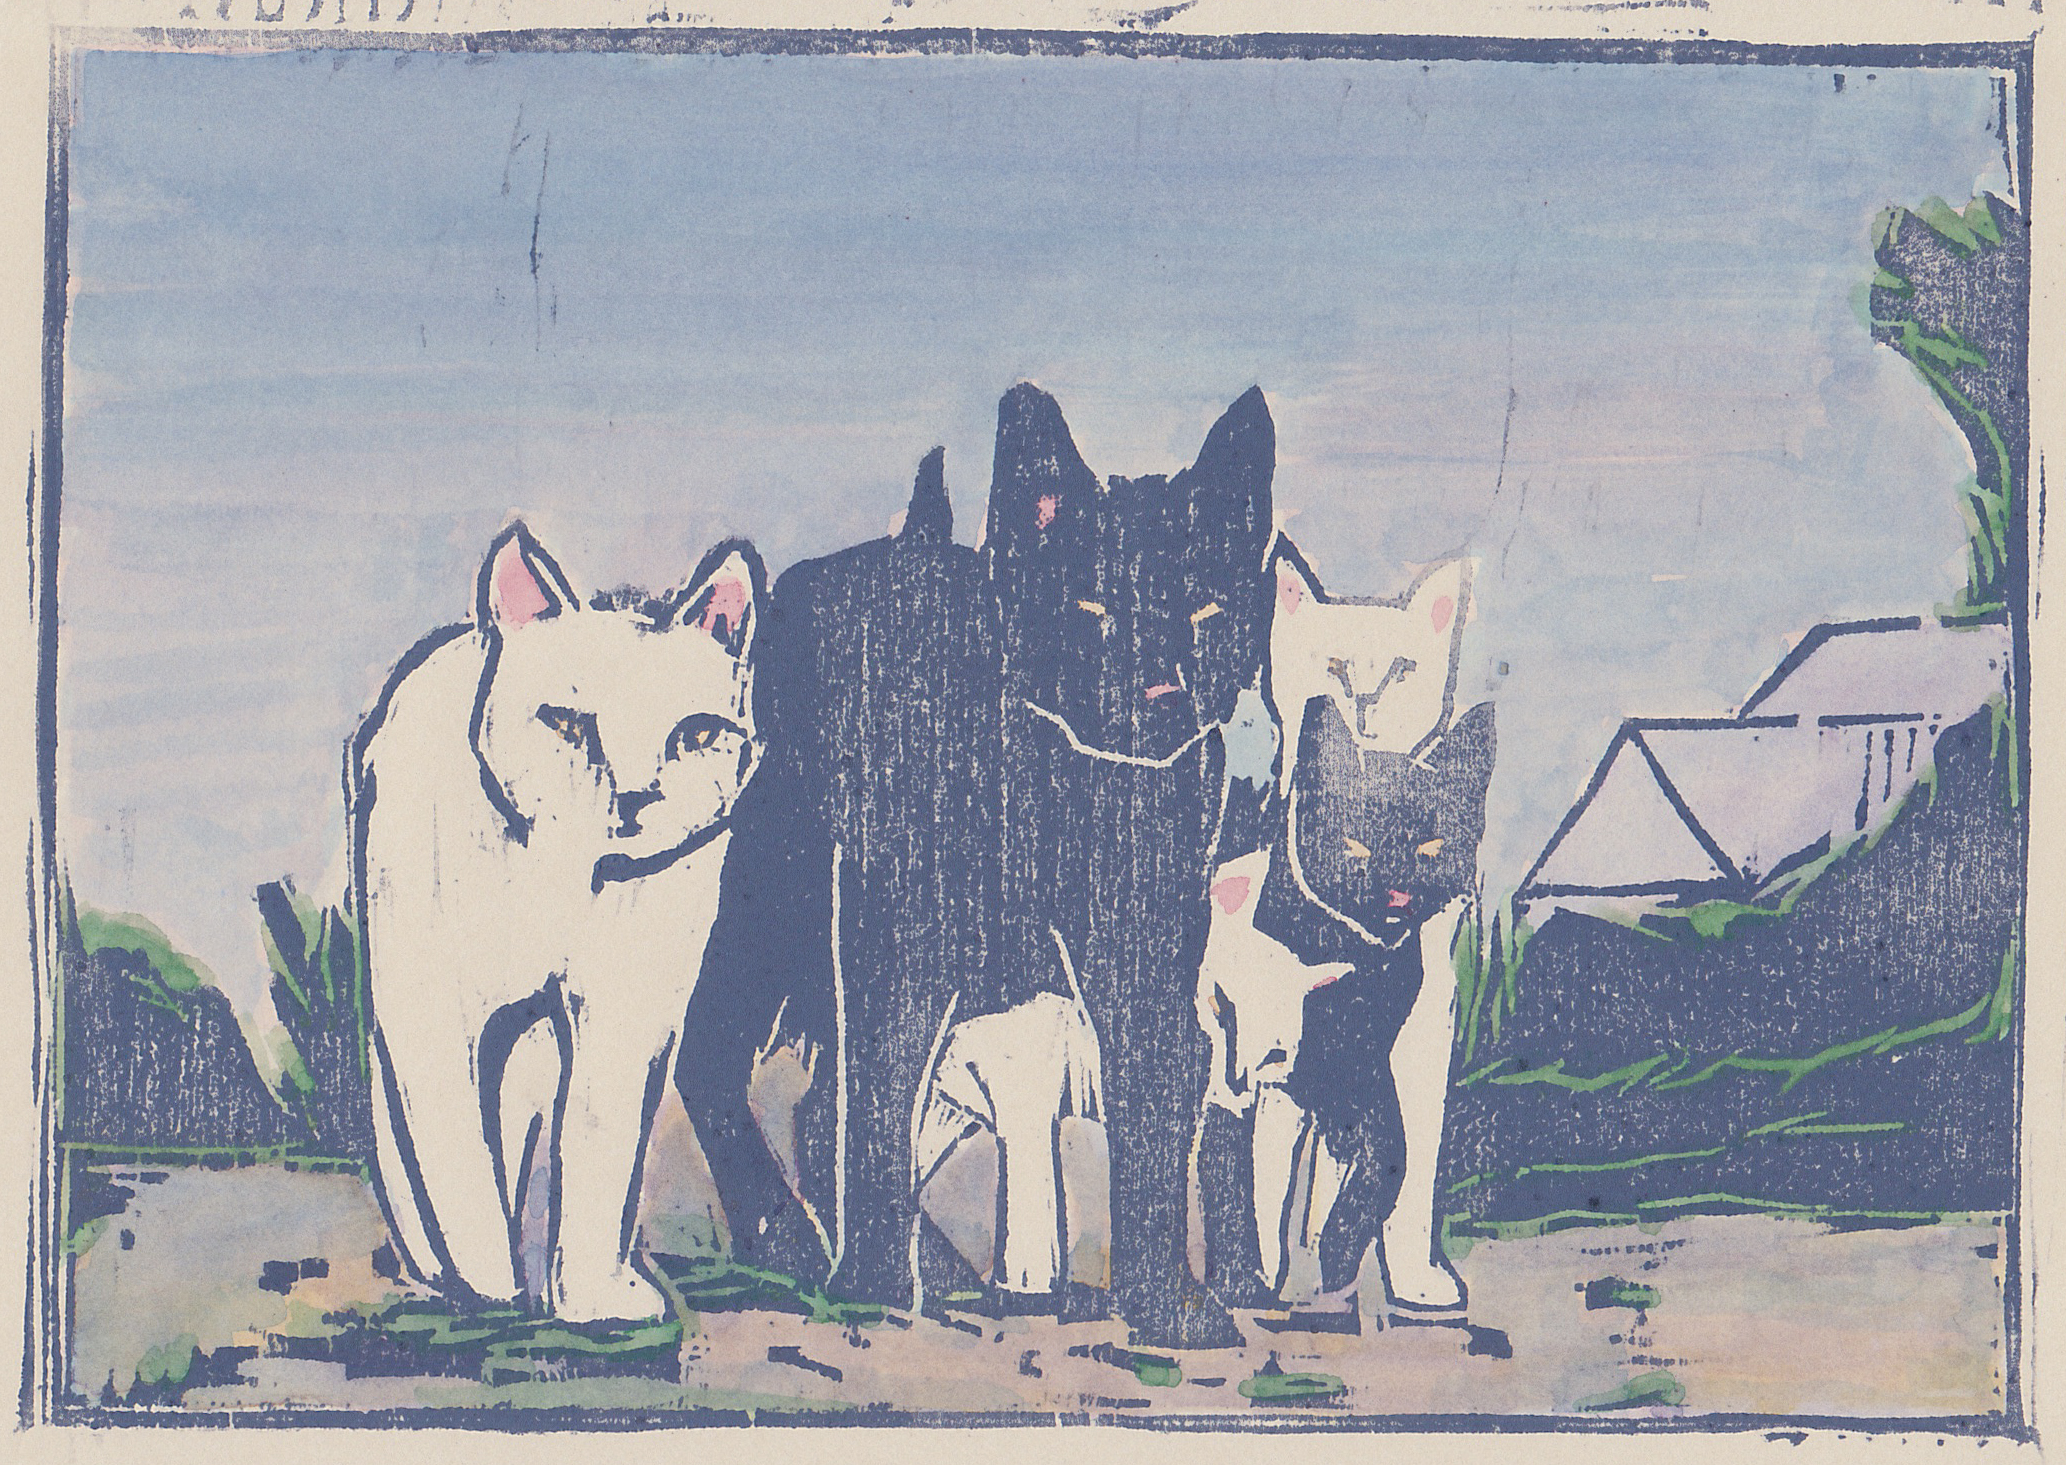   alley cats  woodblock print with hand-coloring 5x7" 2019  